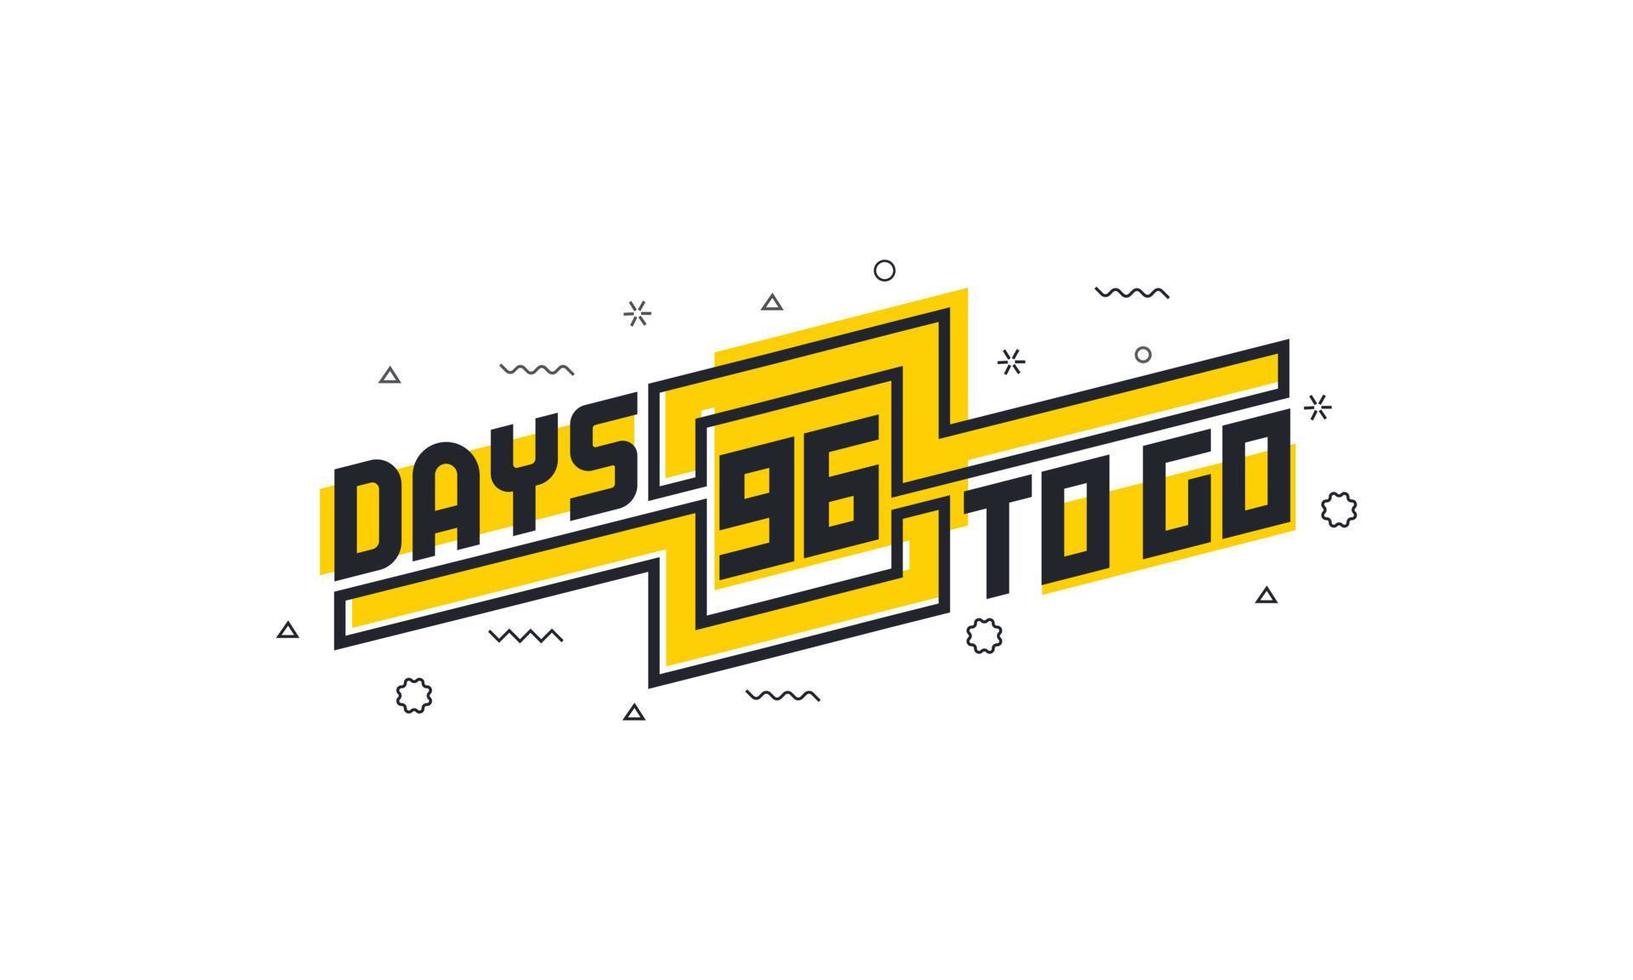 96 days to go countdown sign for sale or promotion. vector